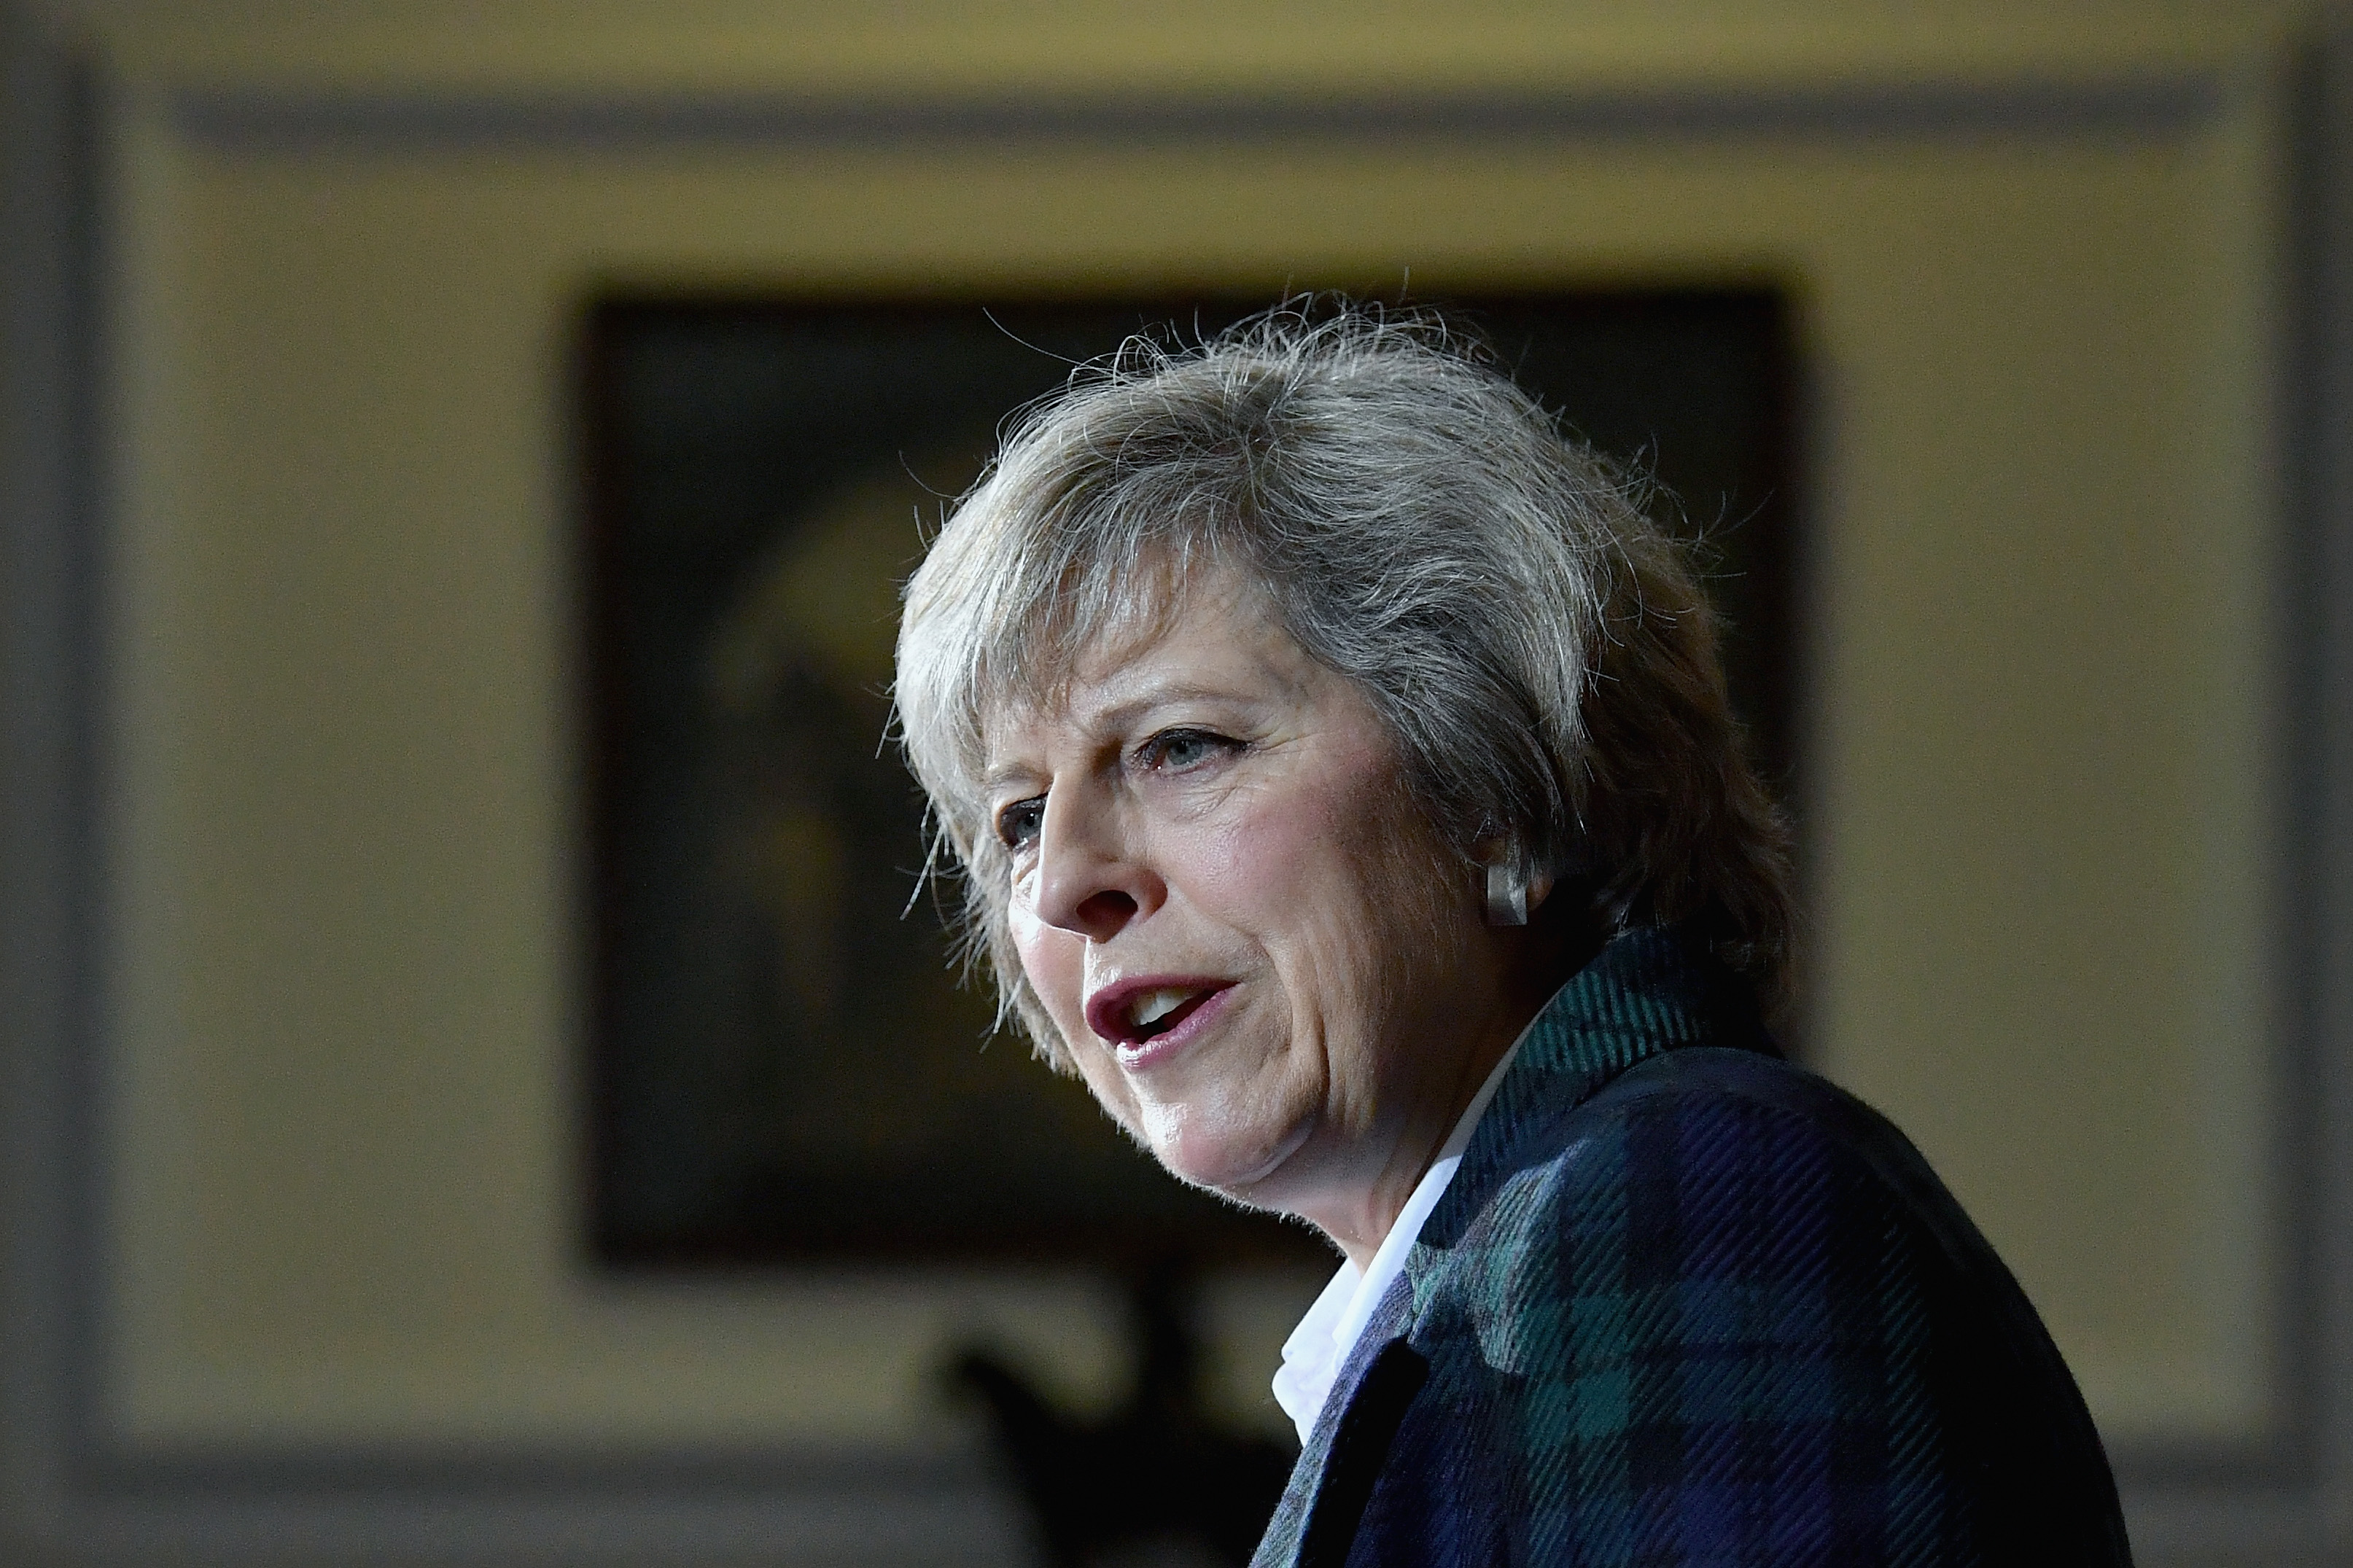 Home Secretary Theresa May Launches Her Bid For The Conservative Leadership